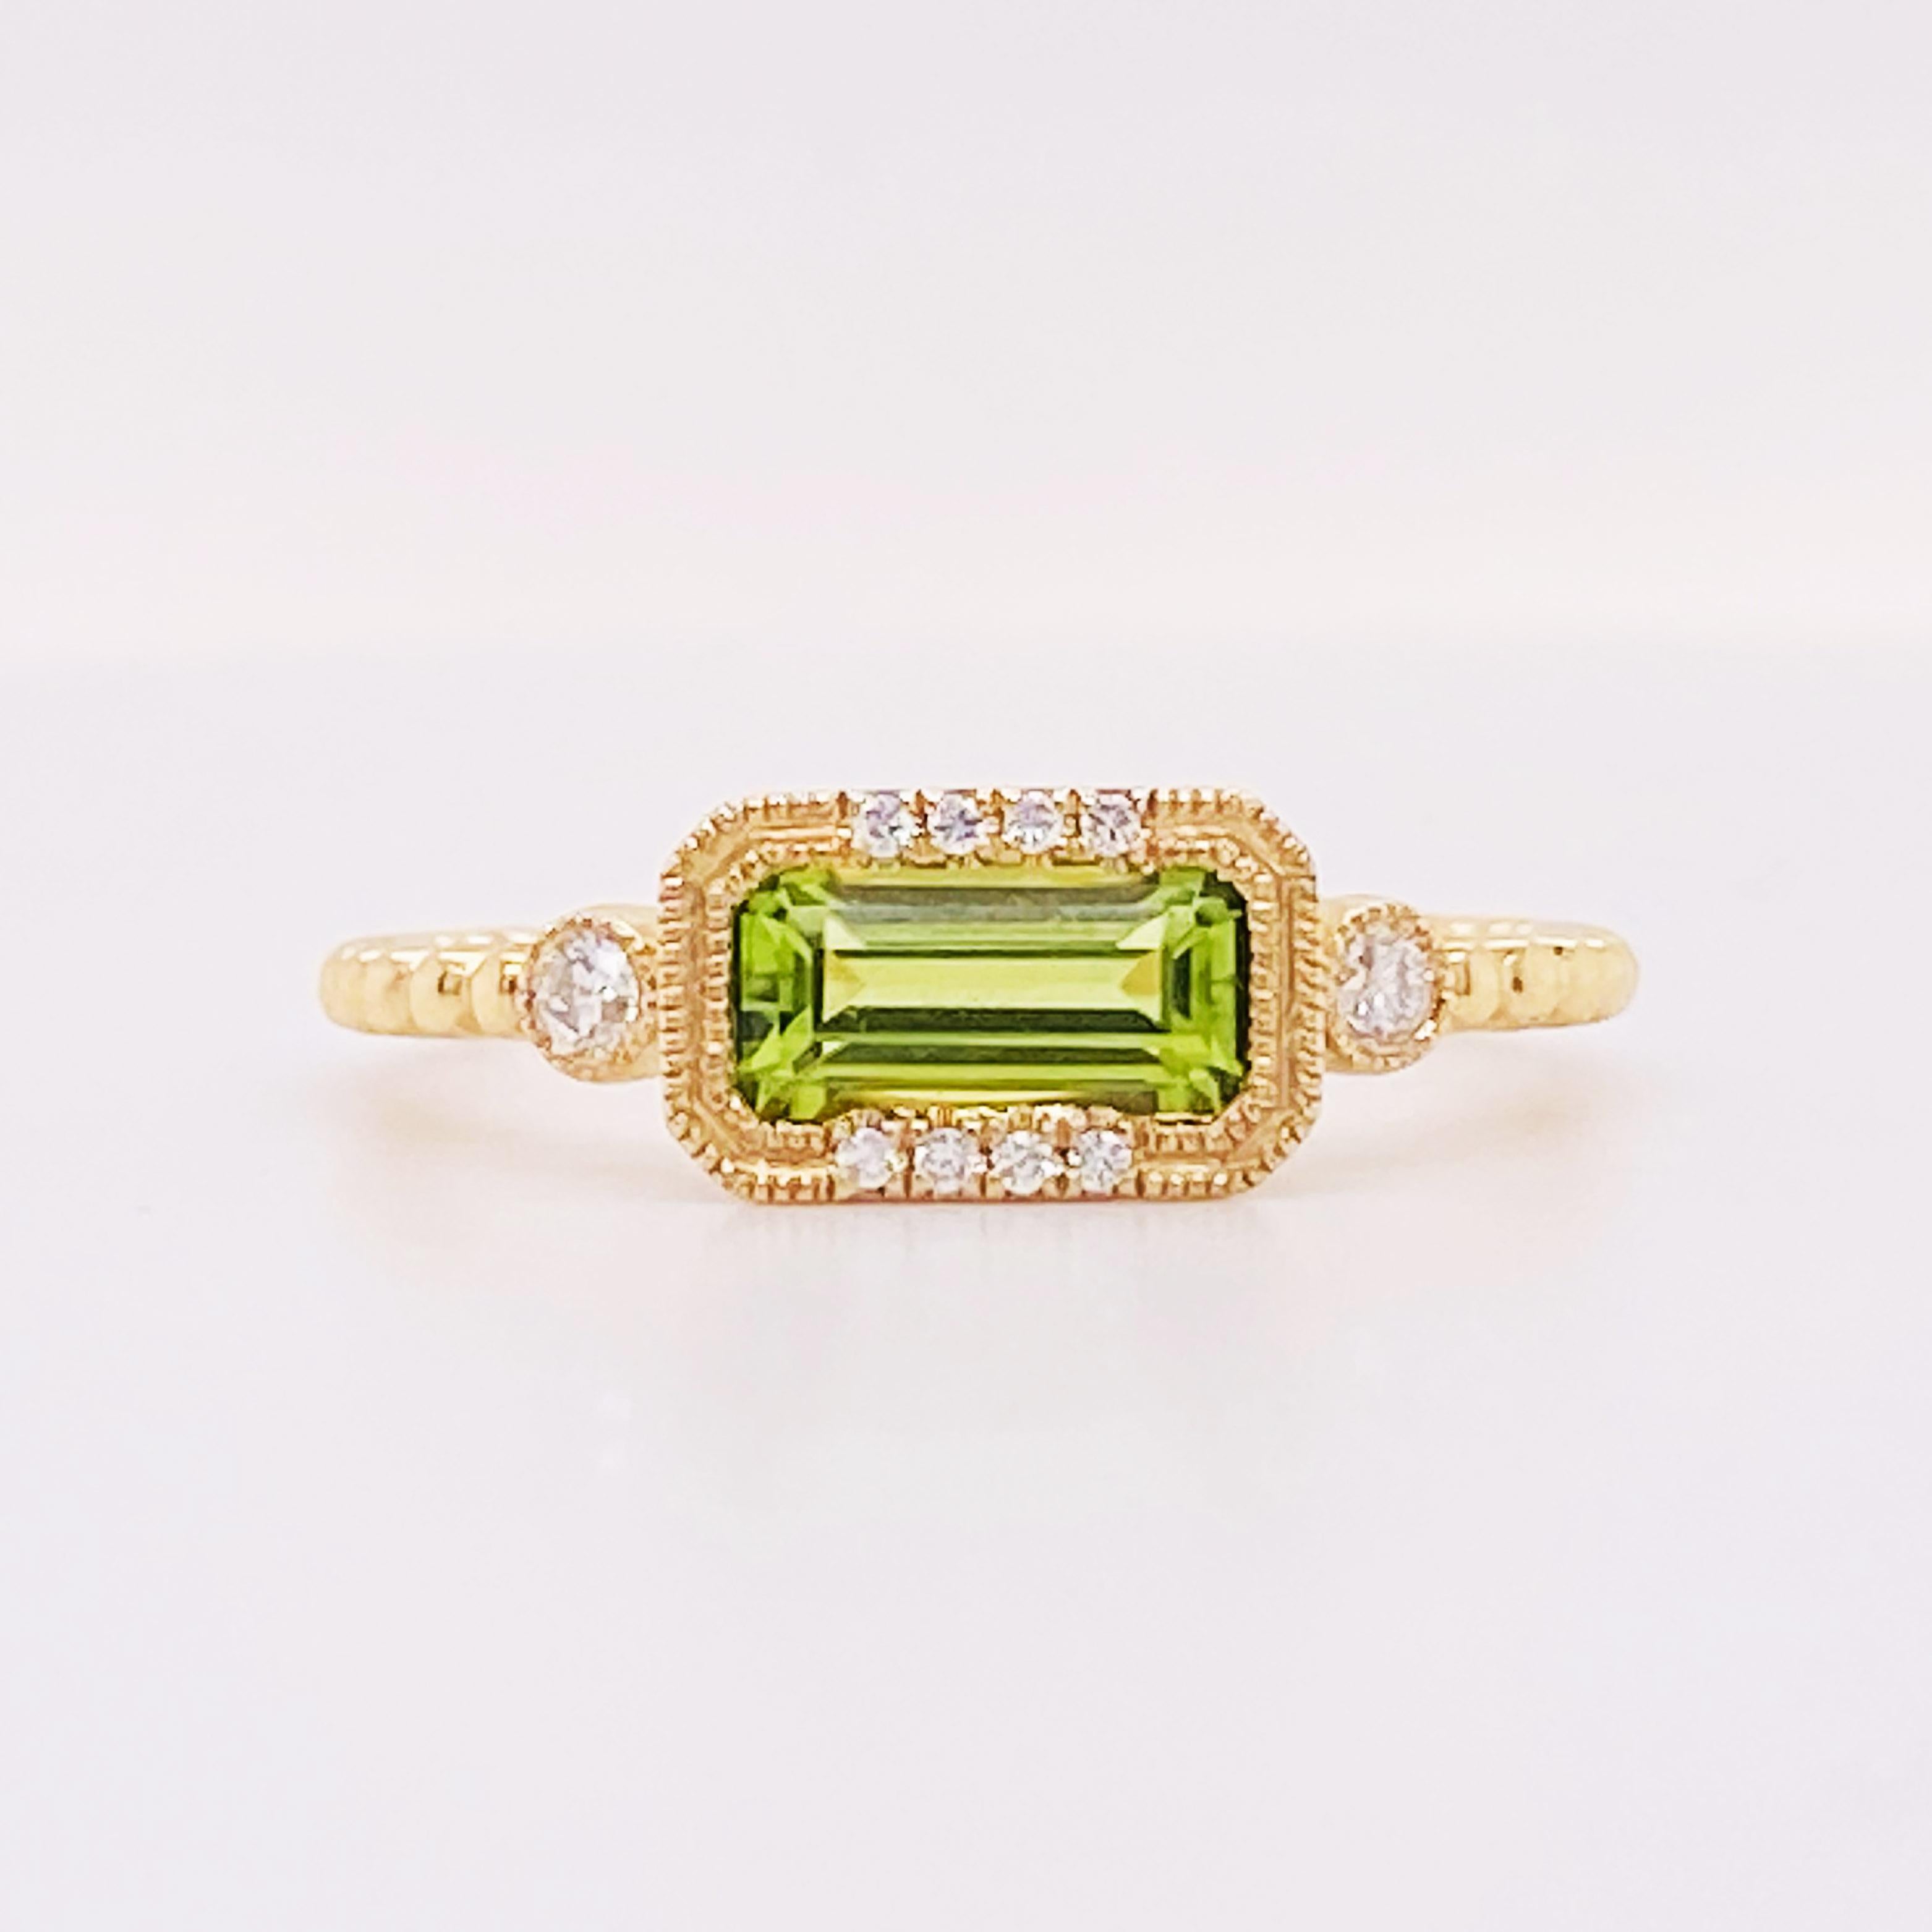 For Sale:  Peridot Diamond Ring August East to West 14K Gold Ring Sizable 4